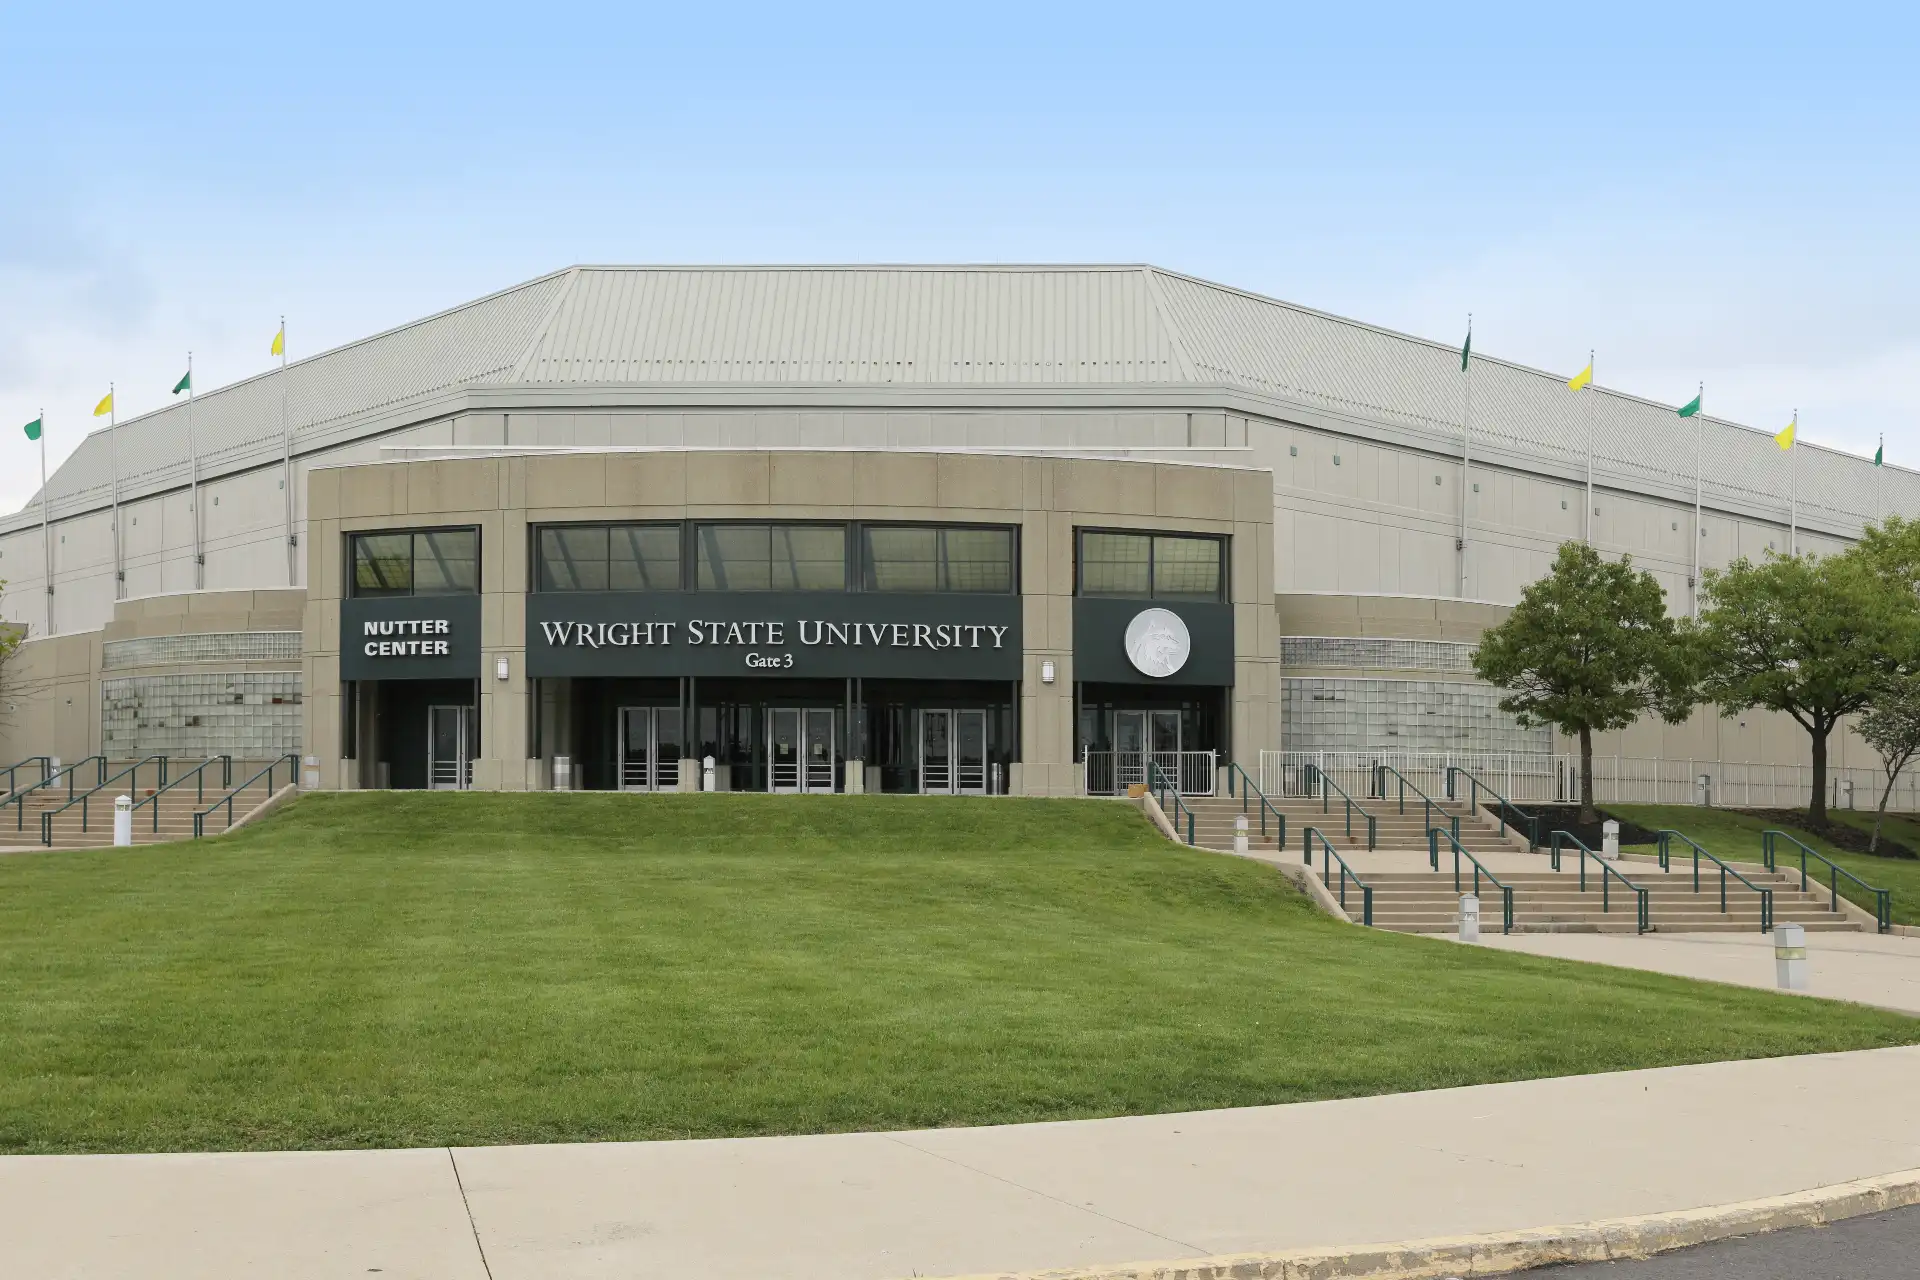 An exterior view of Wright State University in Fairborn, near Brinley Place.